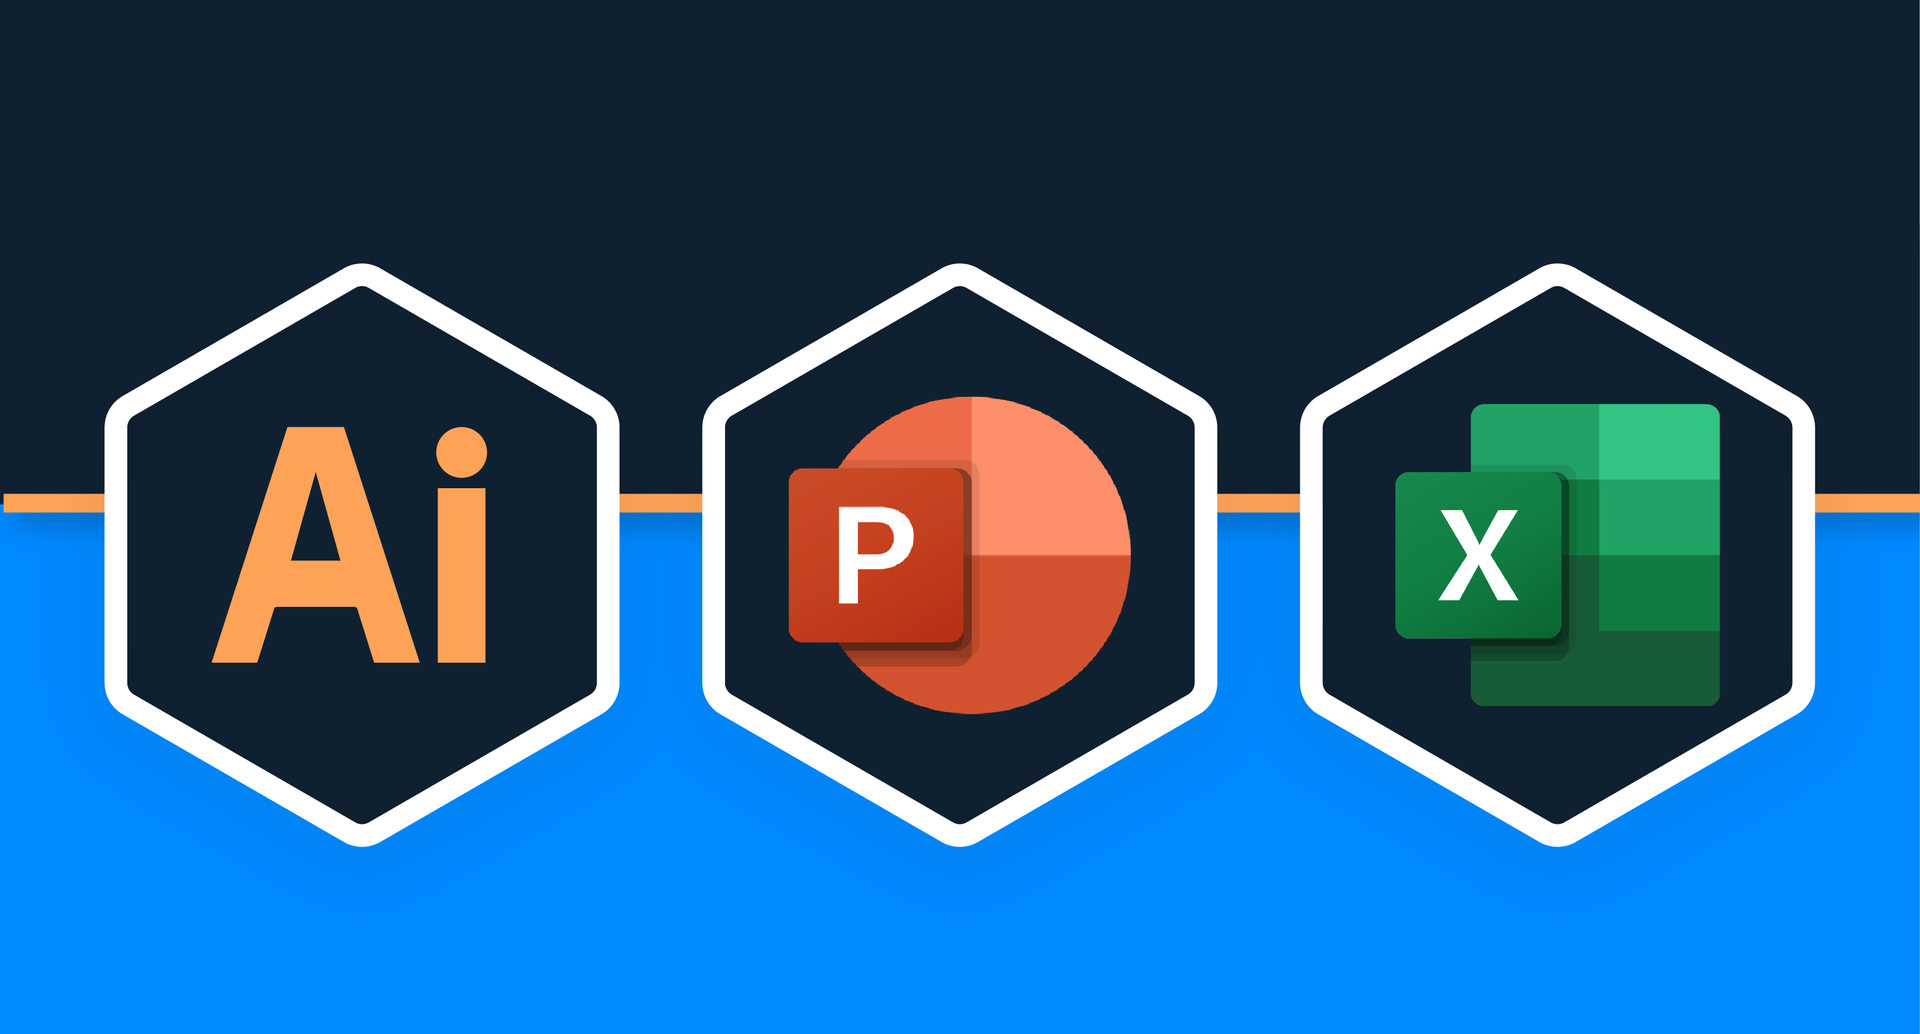 Adobe Illustrator, PowerPoint and Excel template icons